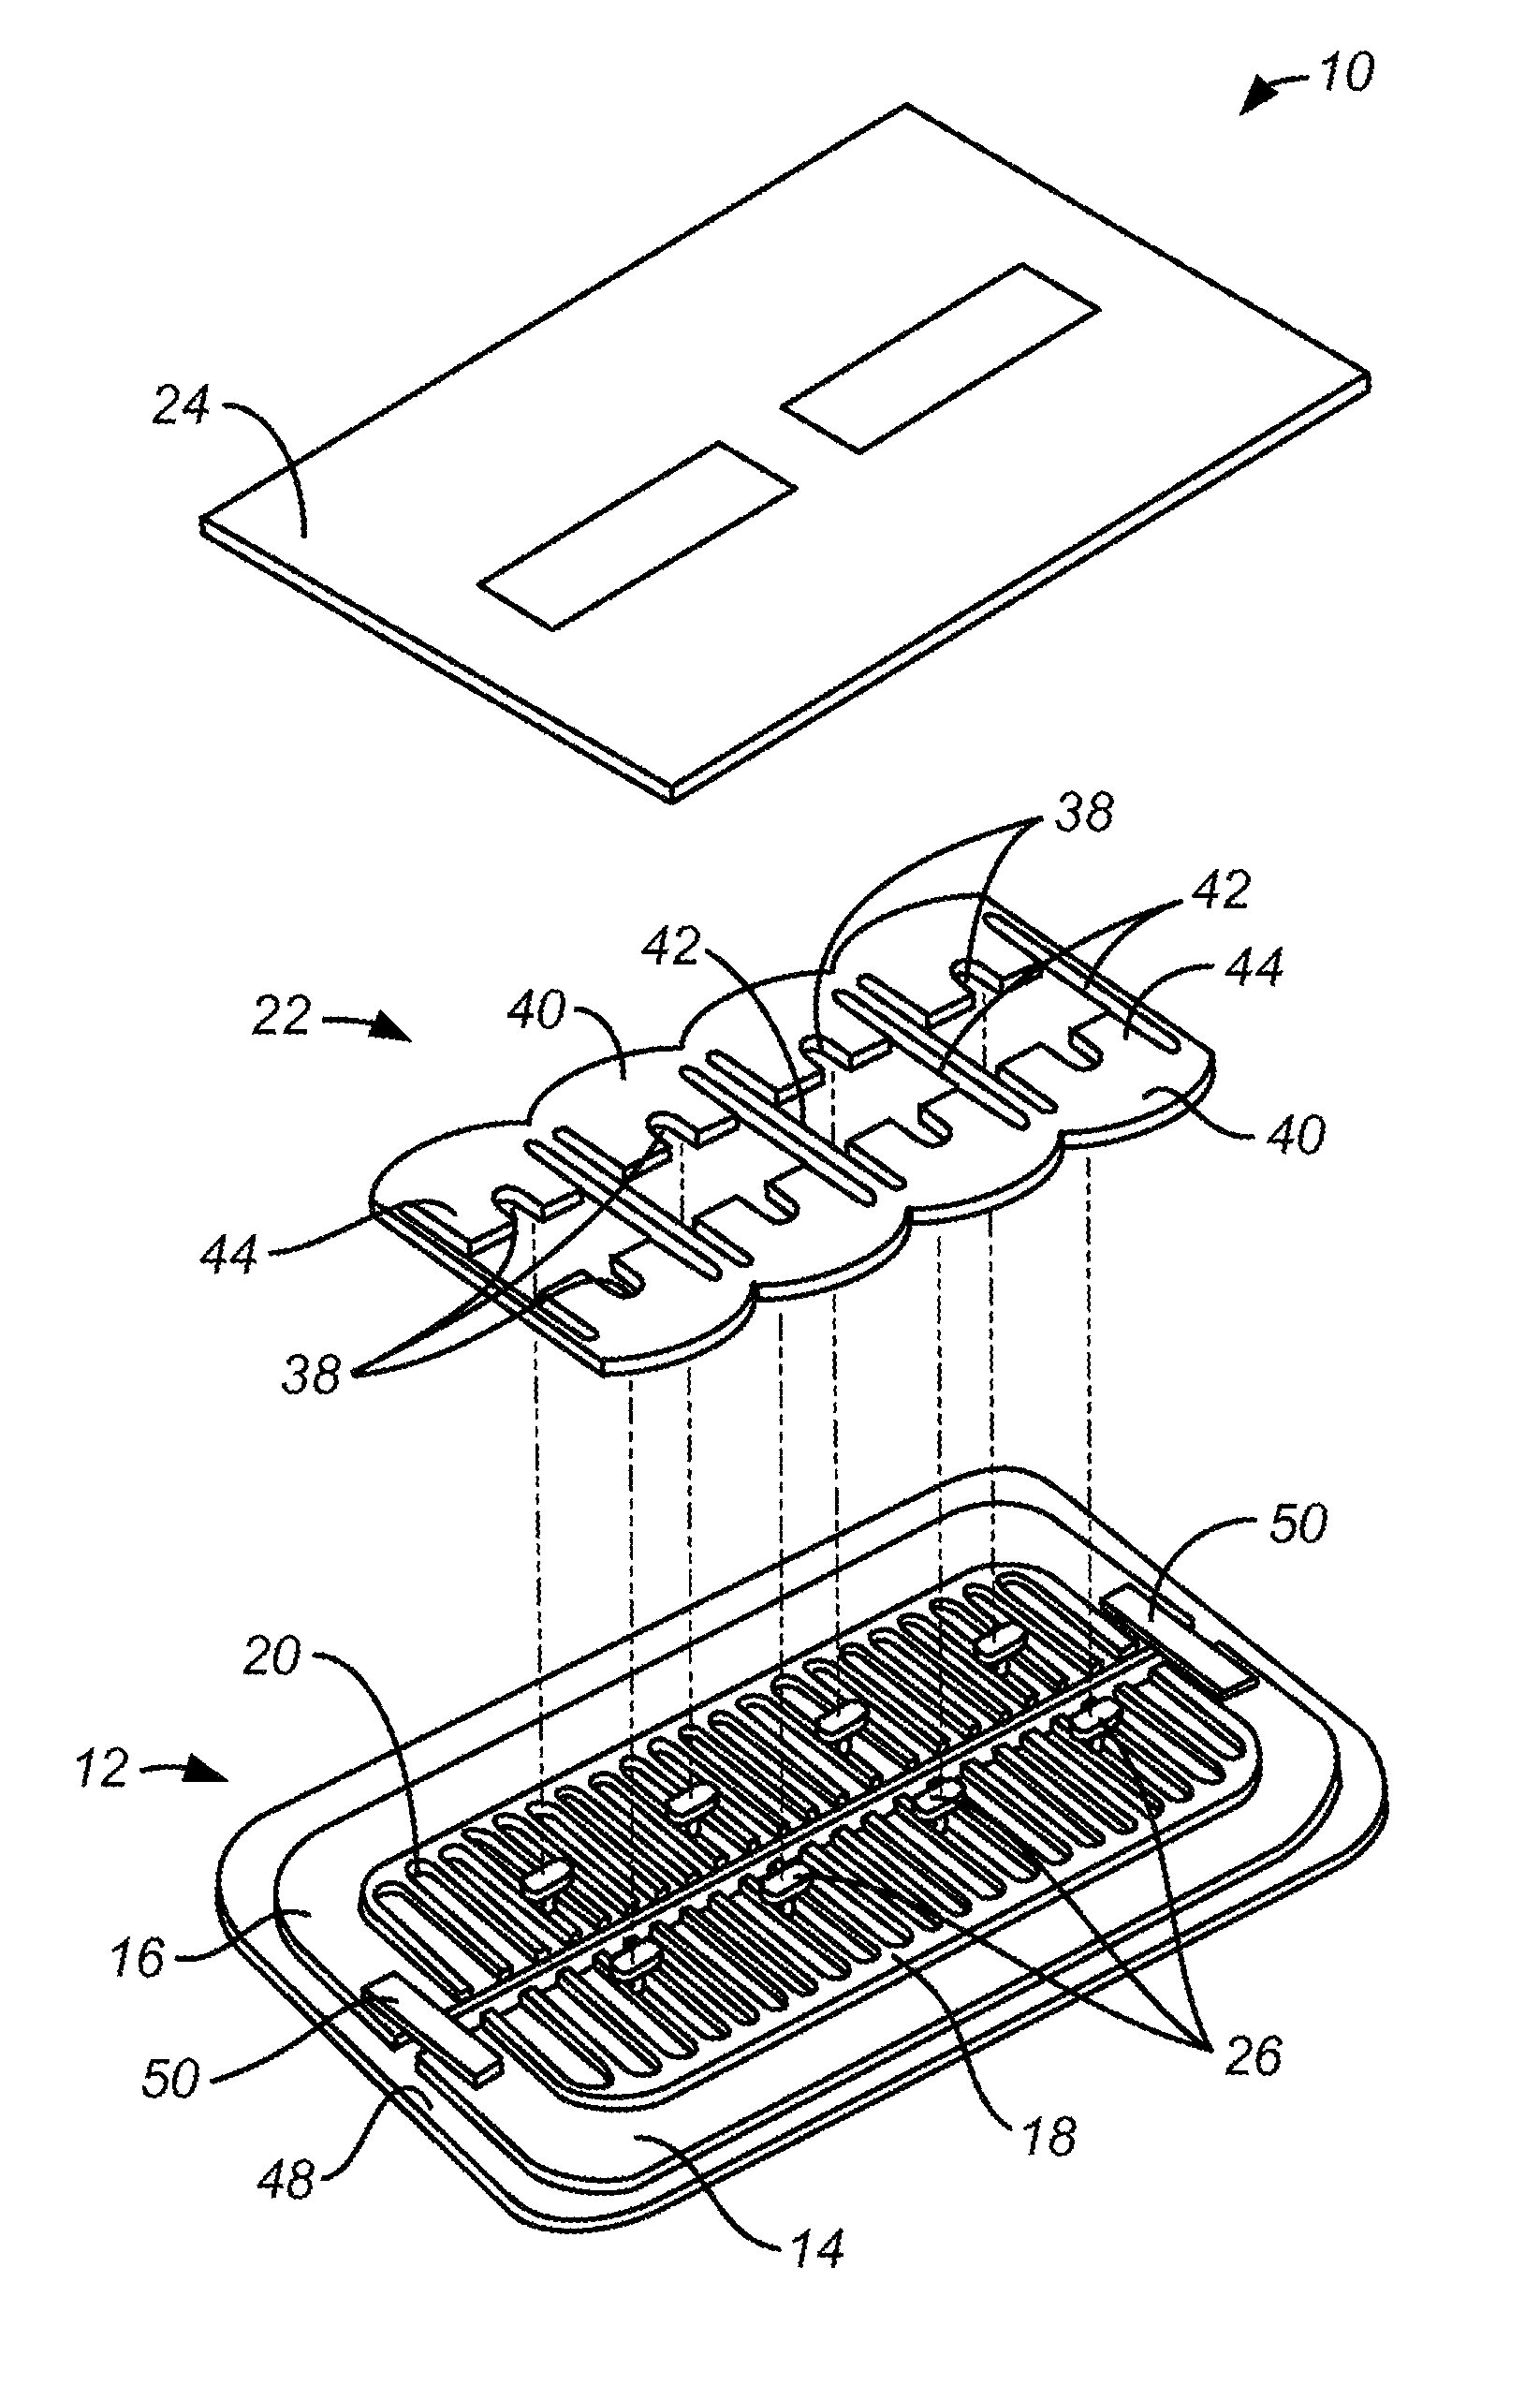 Surgical incision and closure apparatus